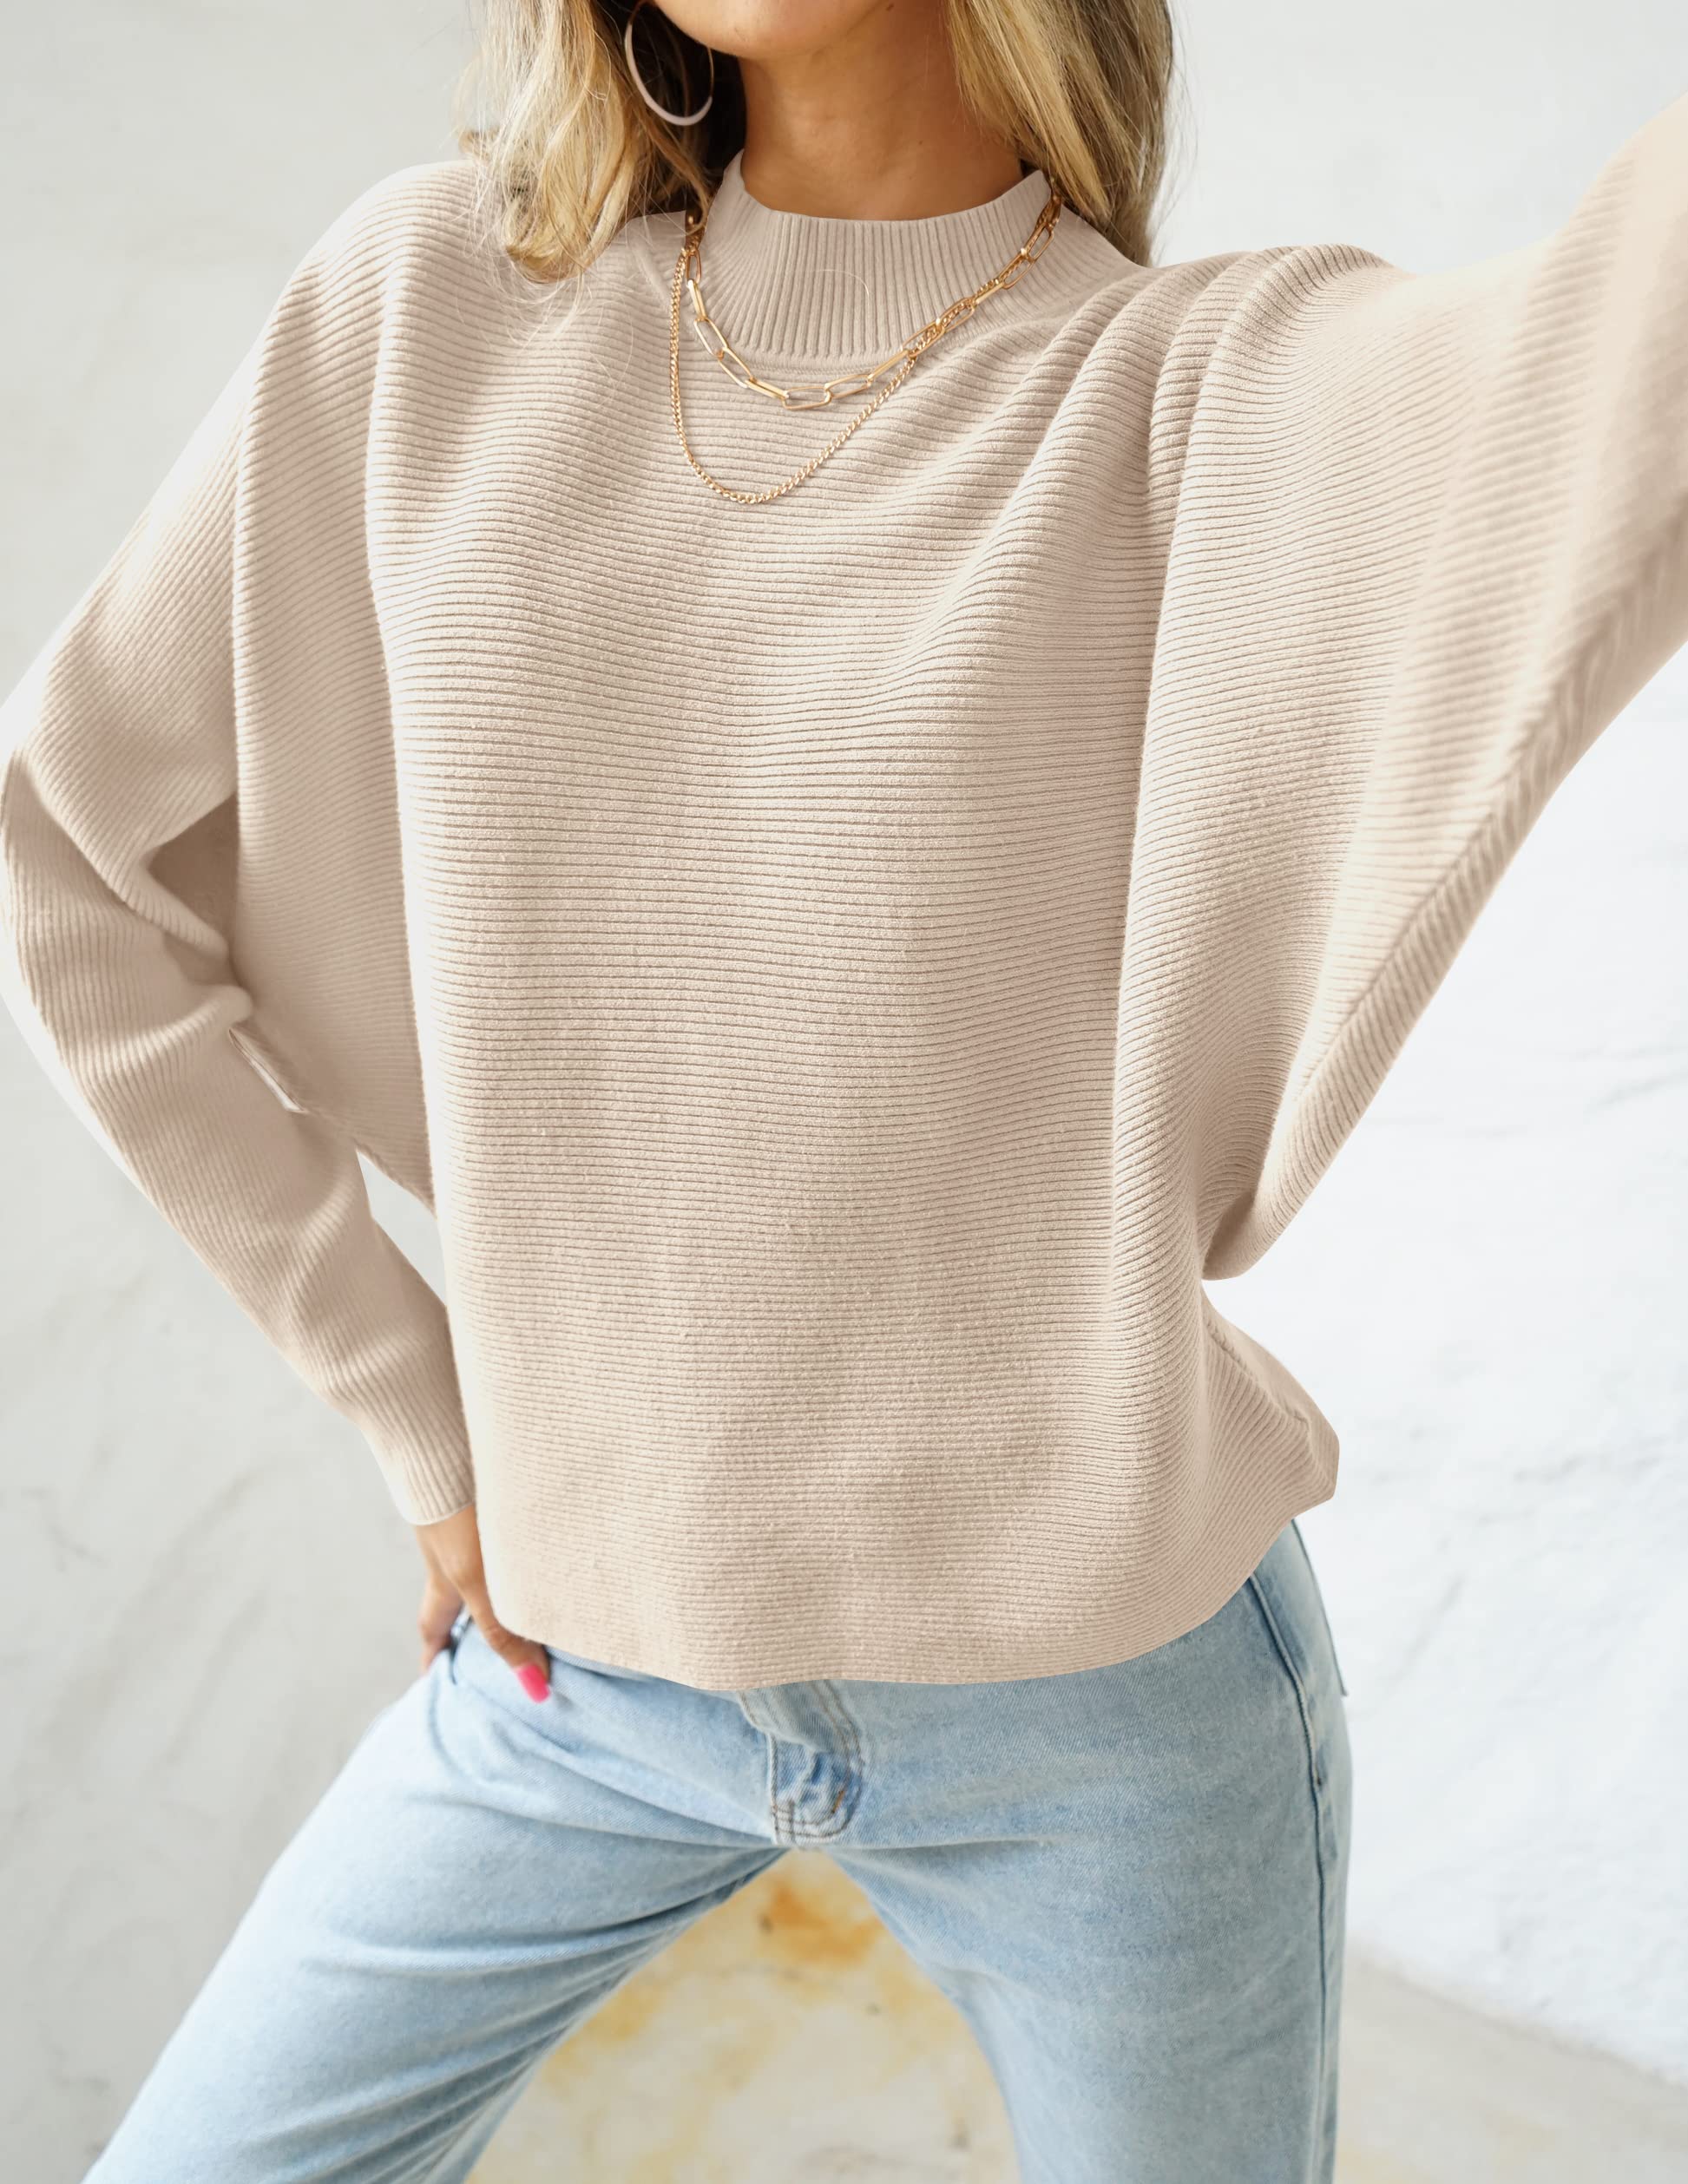 ZESICA Women's 2023 Fall Turtleneck Batwing Long Sleeve Ribbed Knit Casual Soft Pullover Sweater Jumper Top